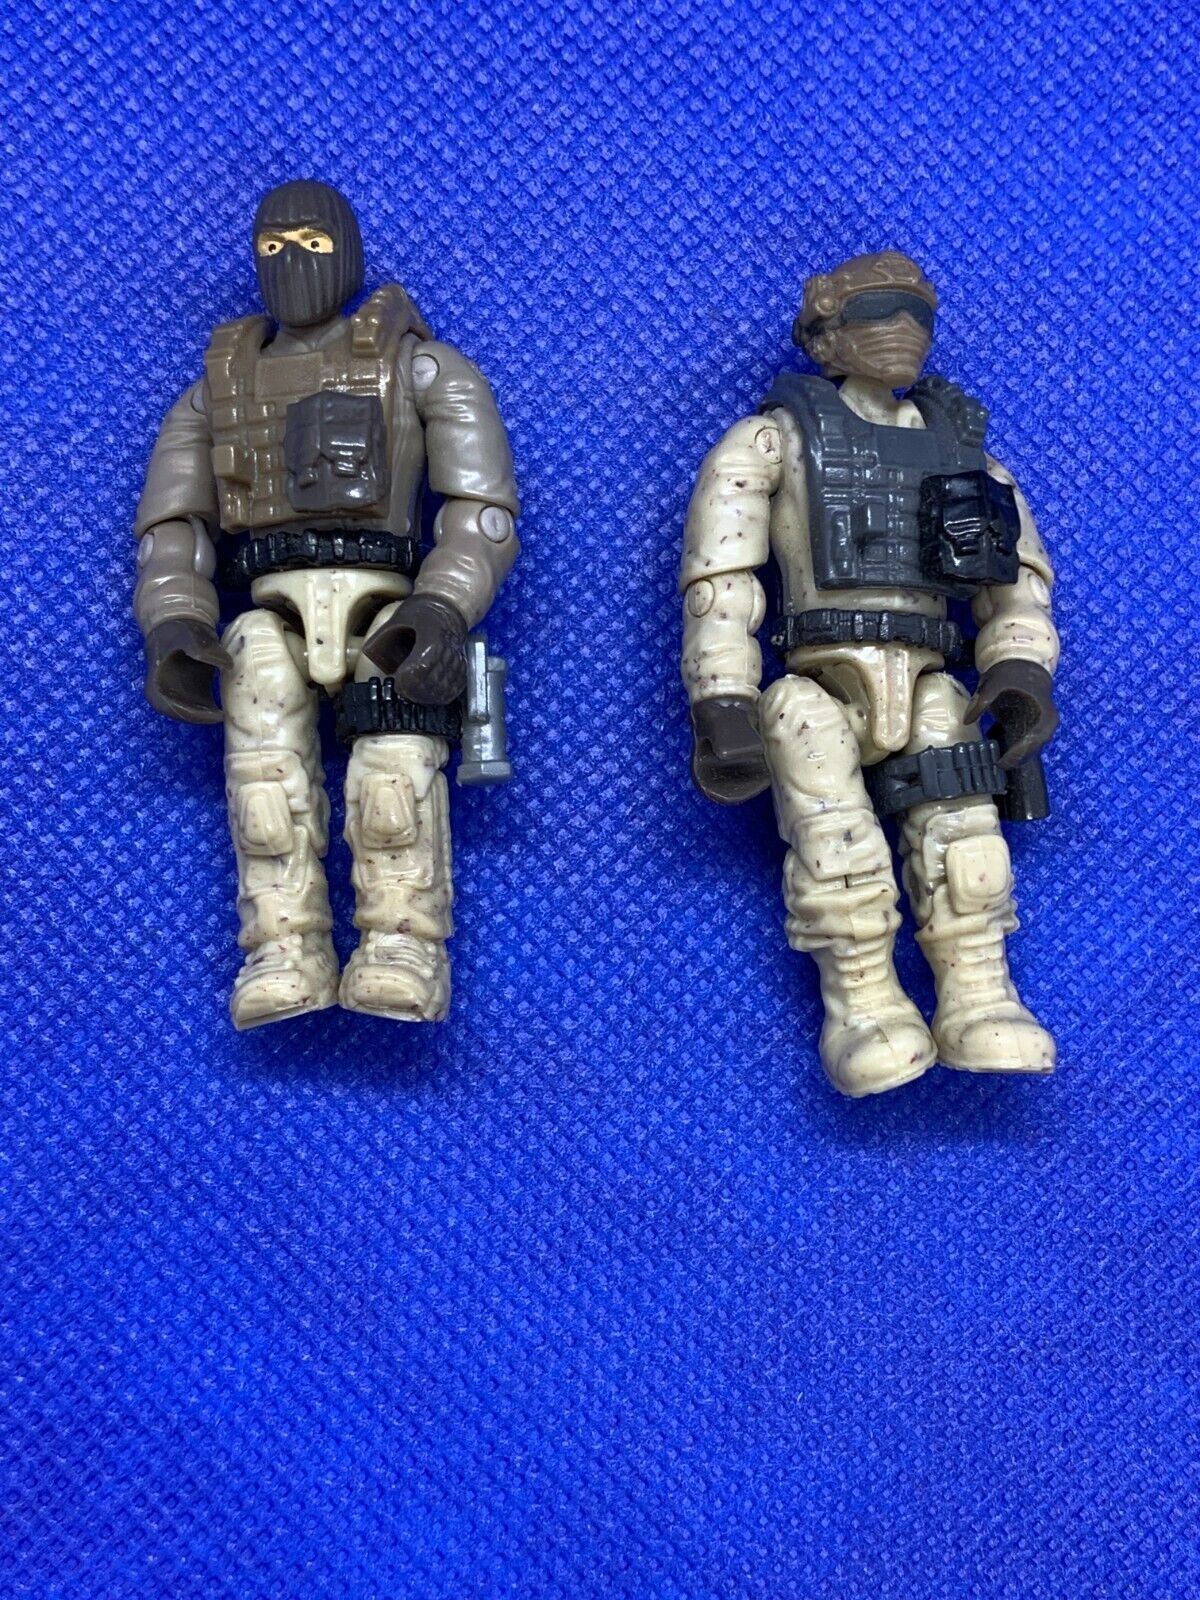 Primary image for Mega Bloks Construx HALO Group of 2 Mini Action Figures 2" Tall Group 20A